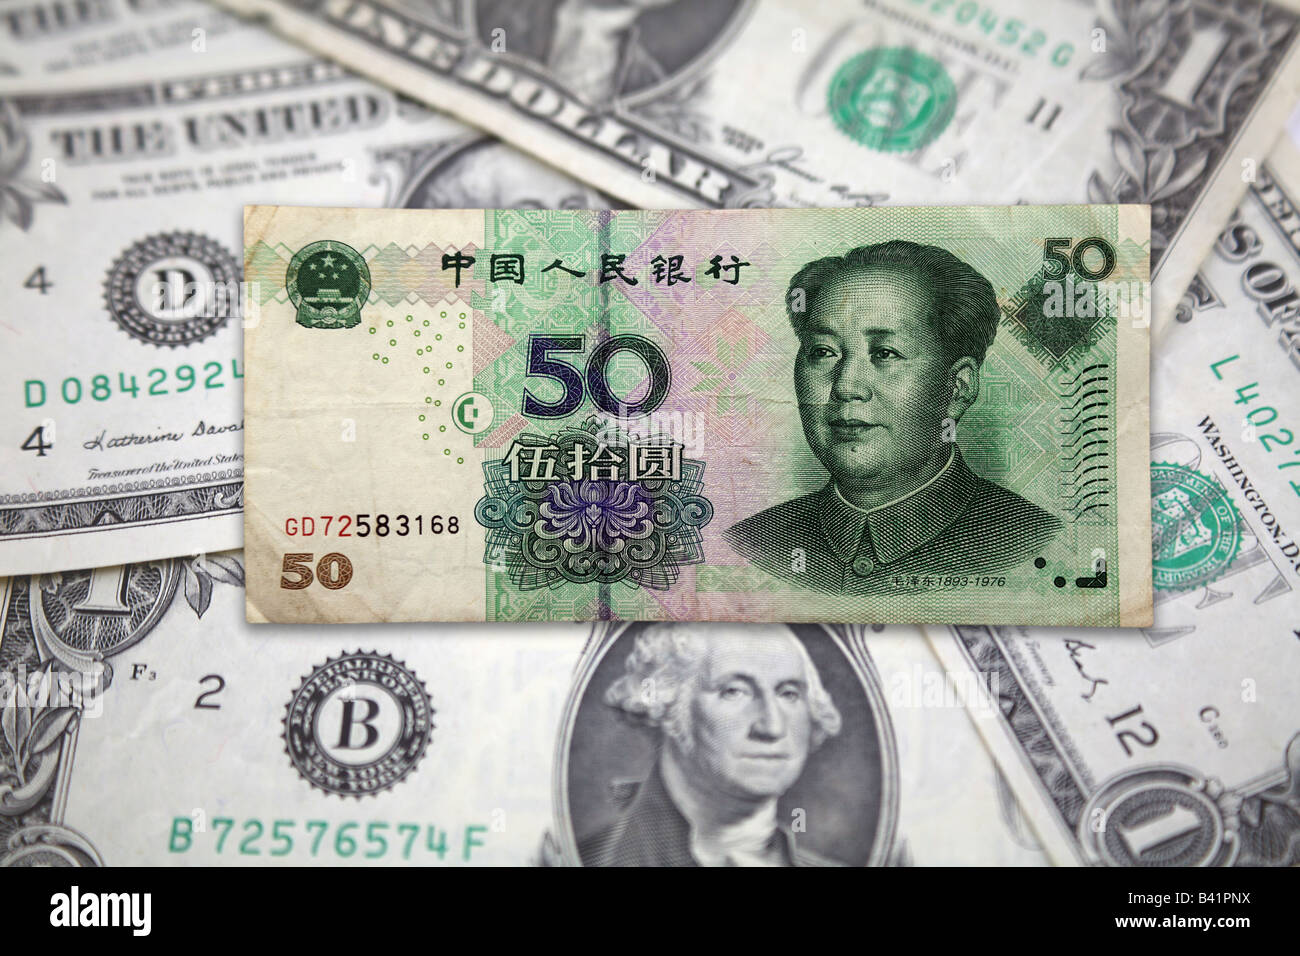 Zhongguo Bank notes from China Renmin Yingyang and Green Back Bank note Dollars from United States of America to represent Trade Stock Photo